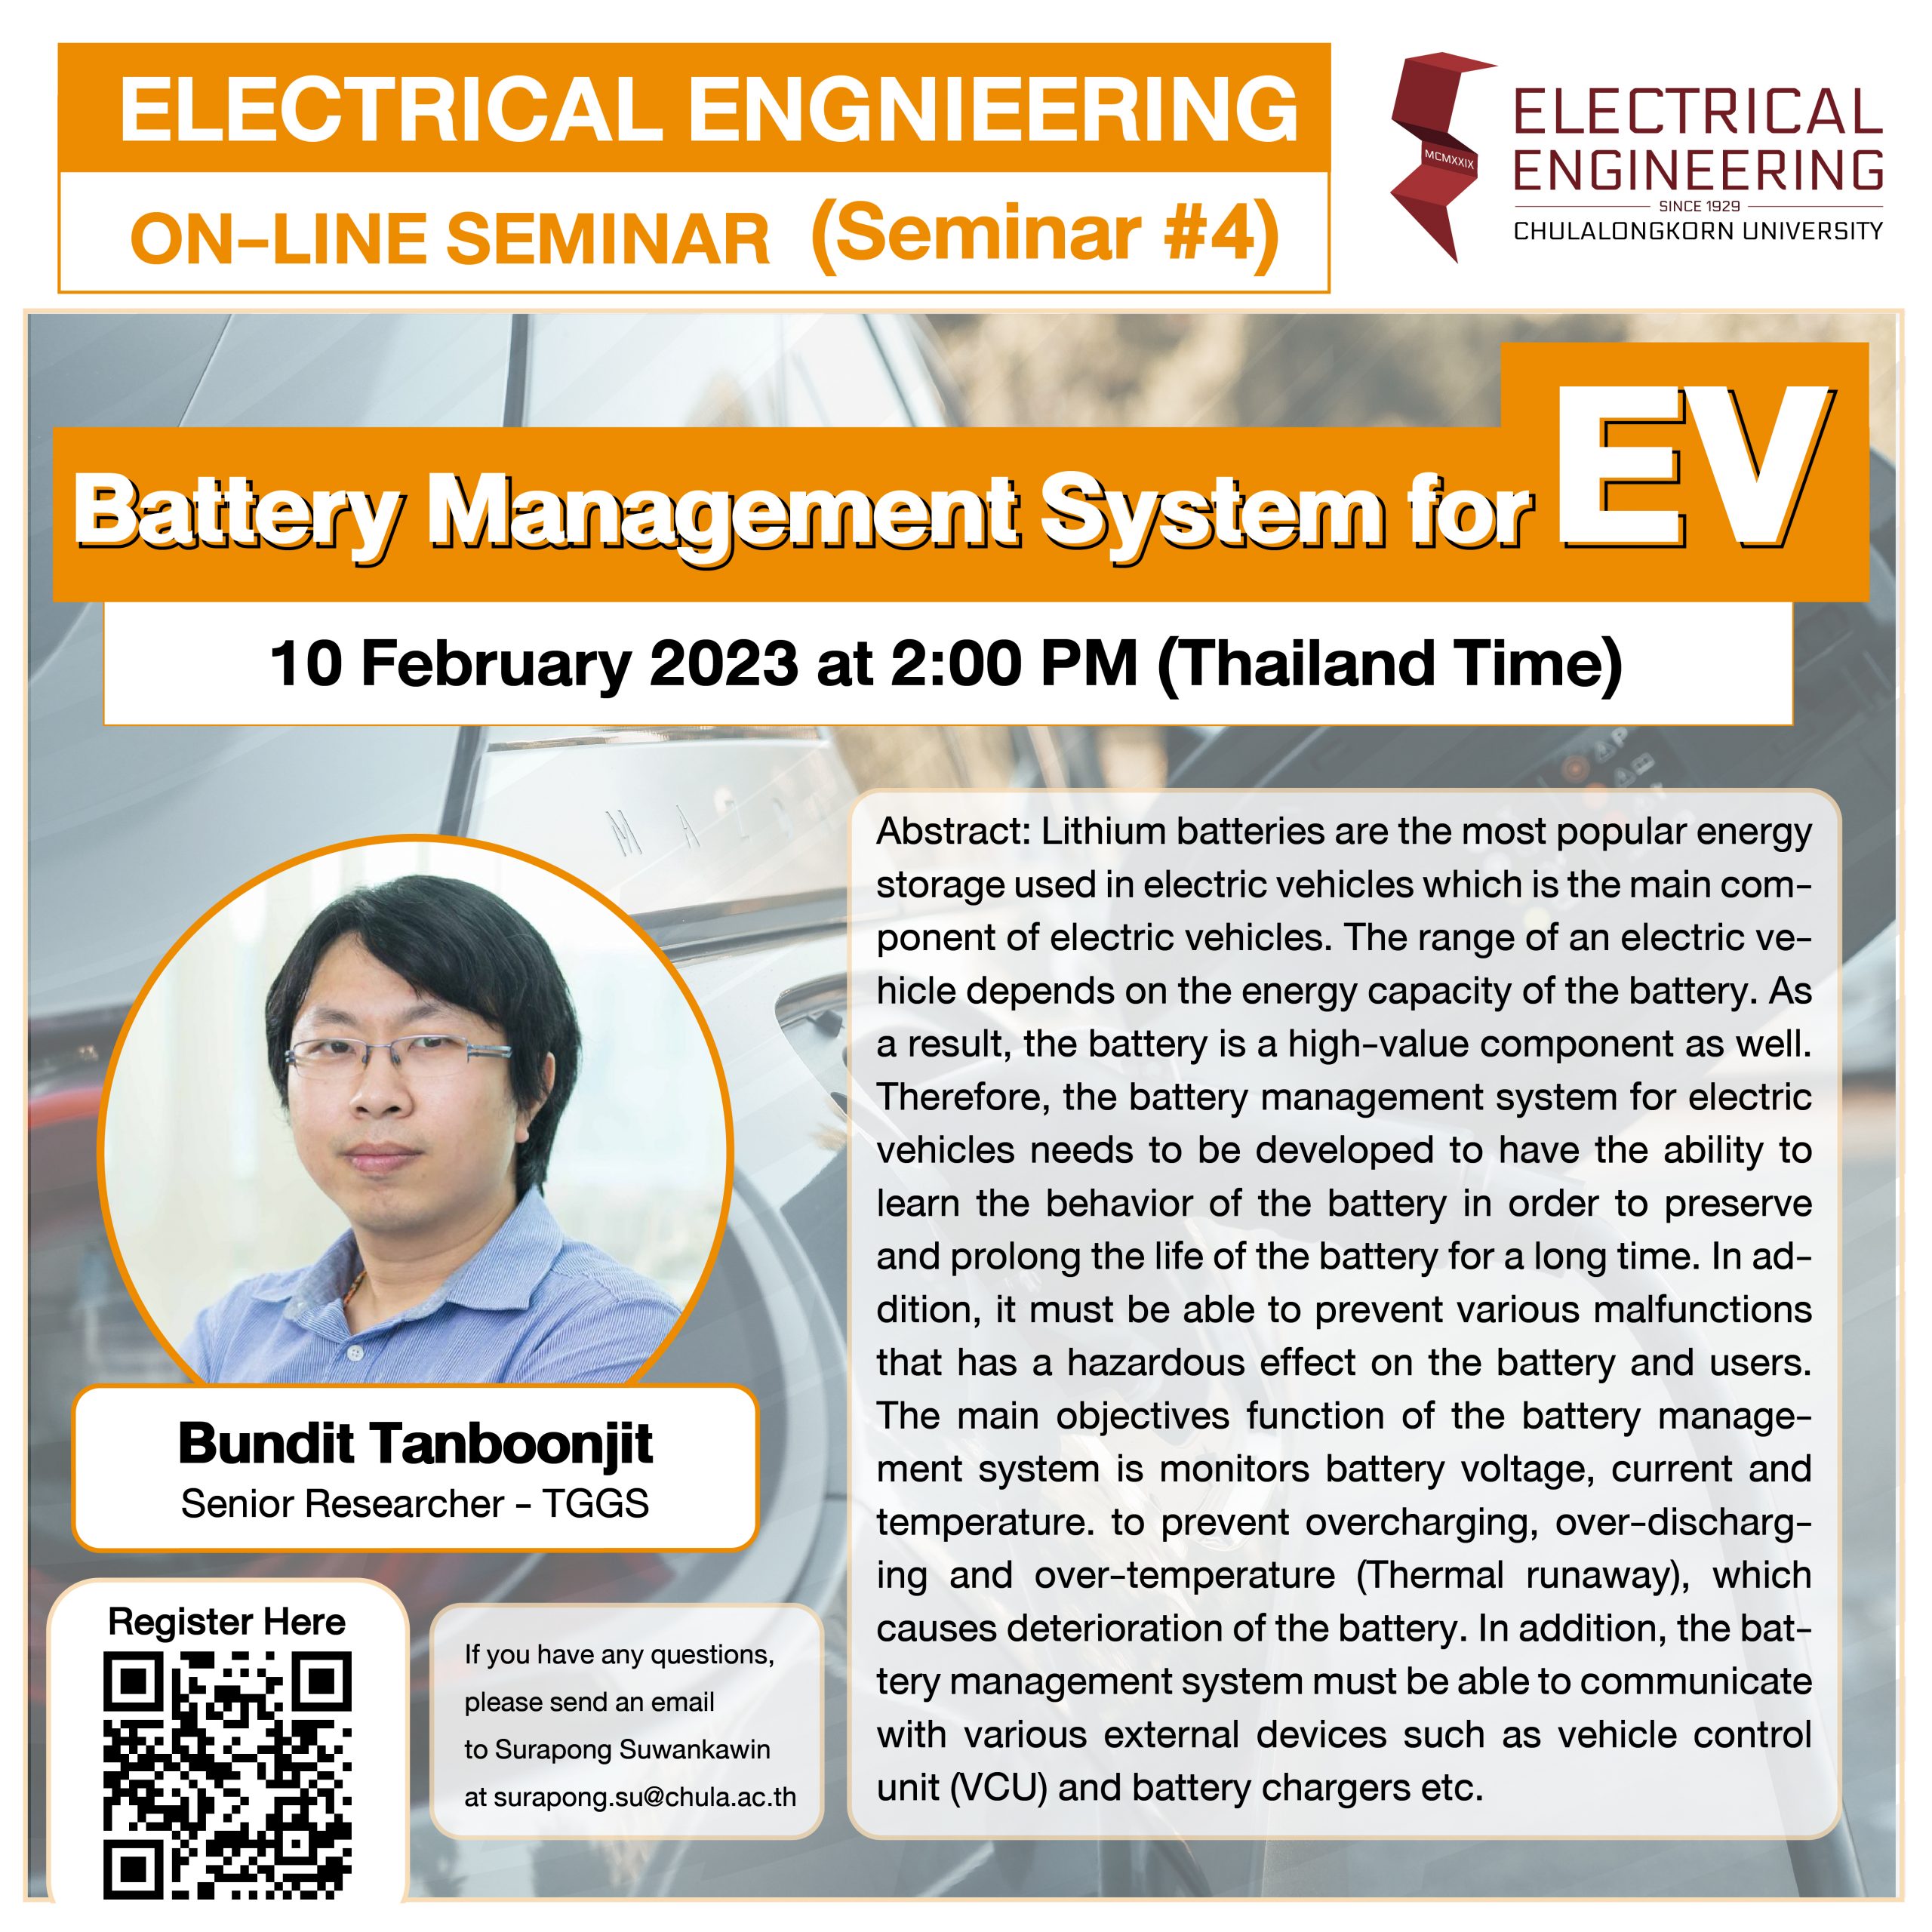 ELECTRICAL ENGNIEERING ON-LINE SEMINAR (Seminar #4) “Battery Management System for EV”